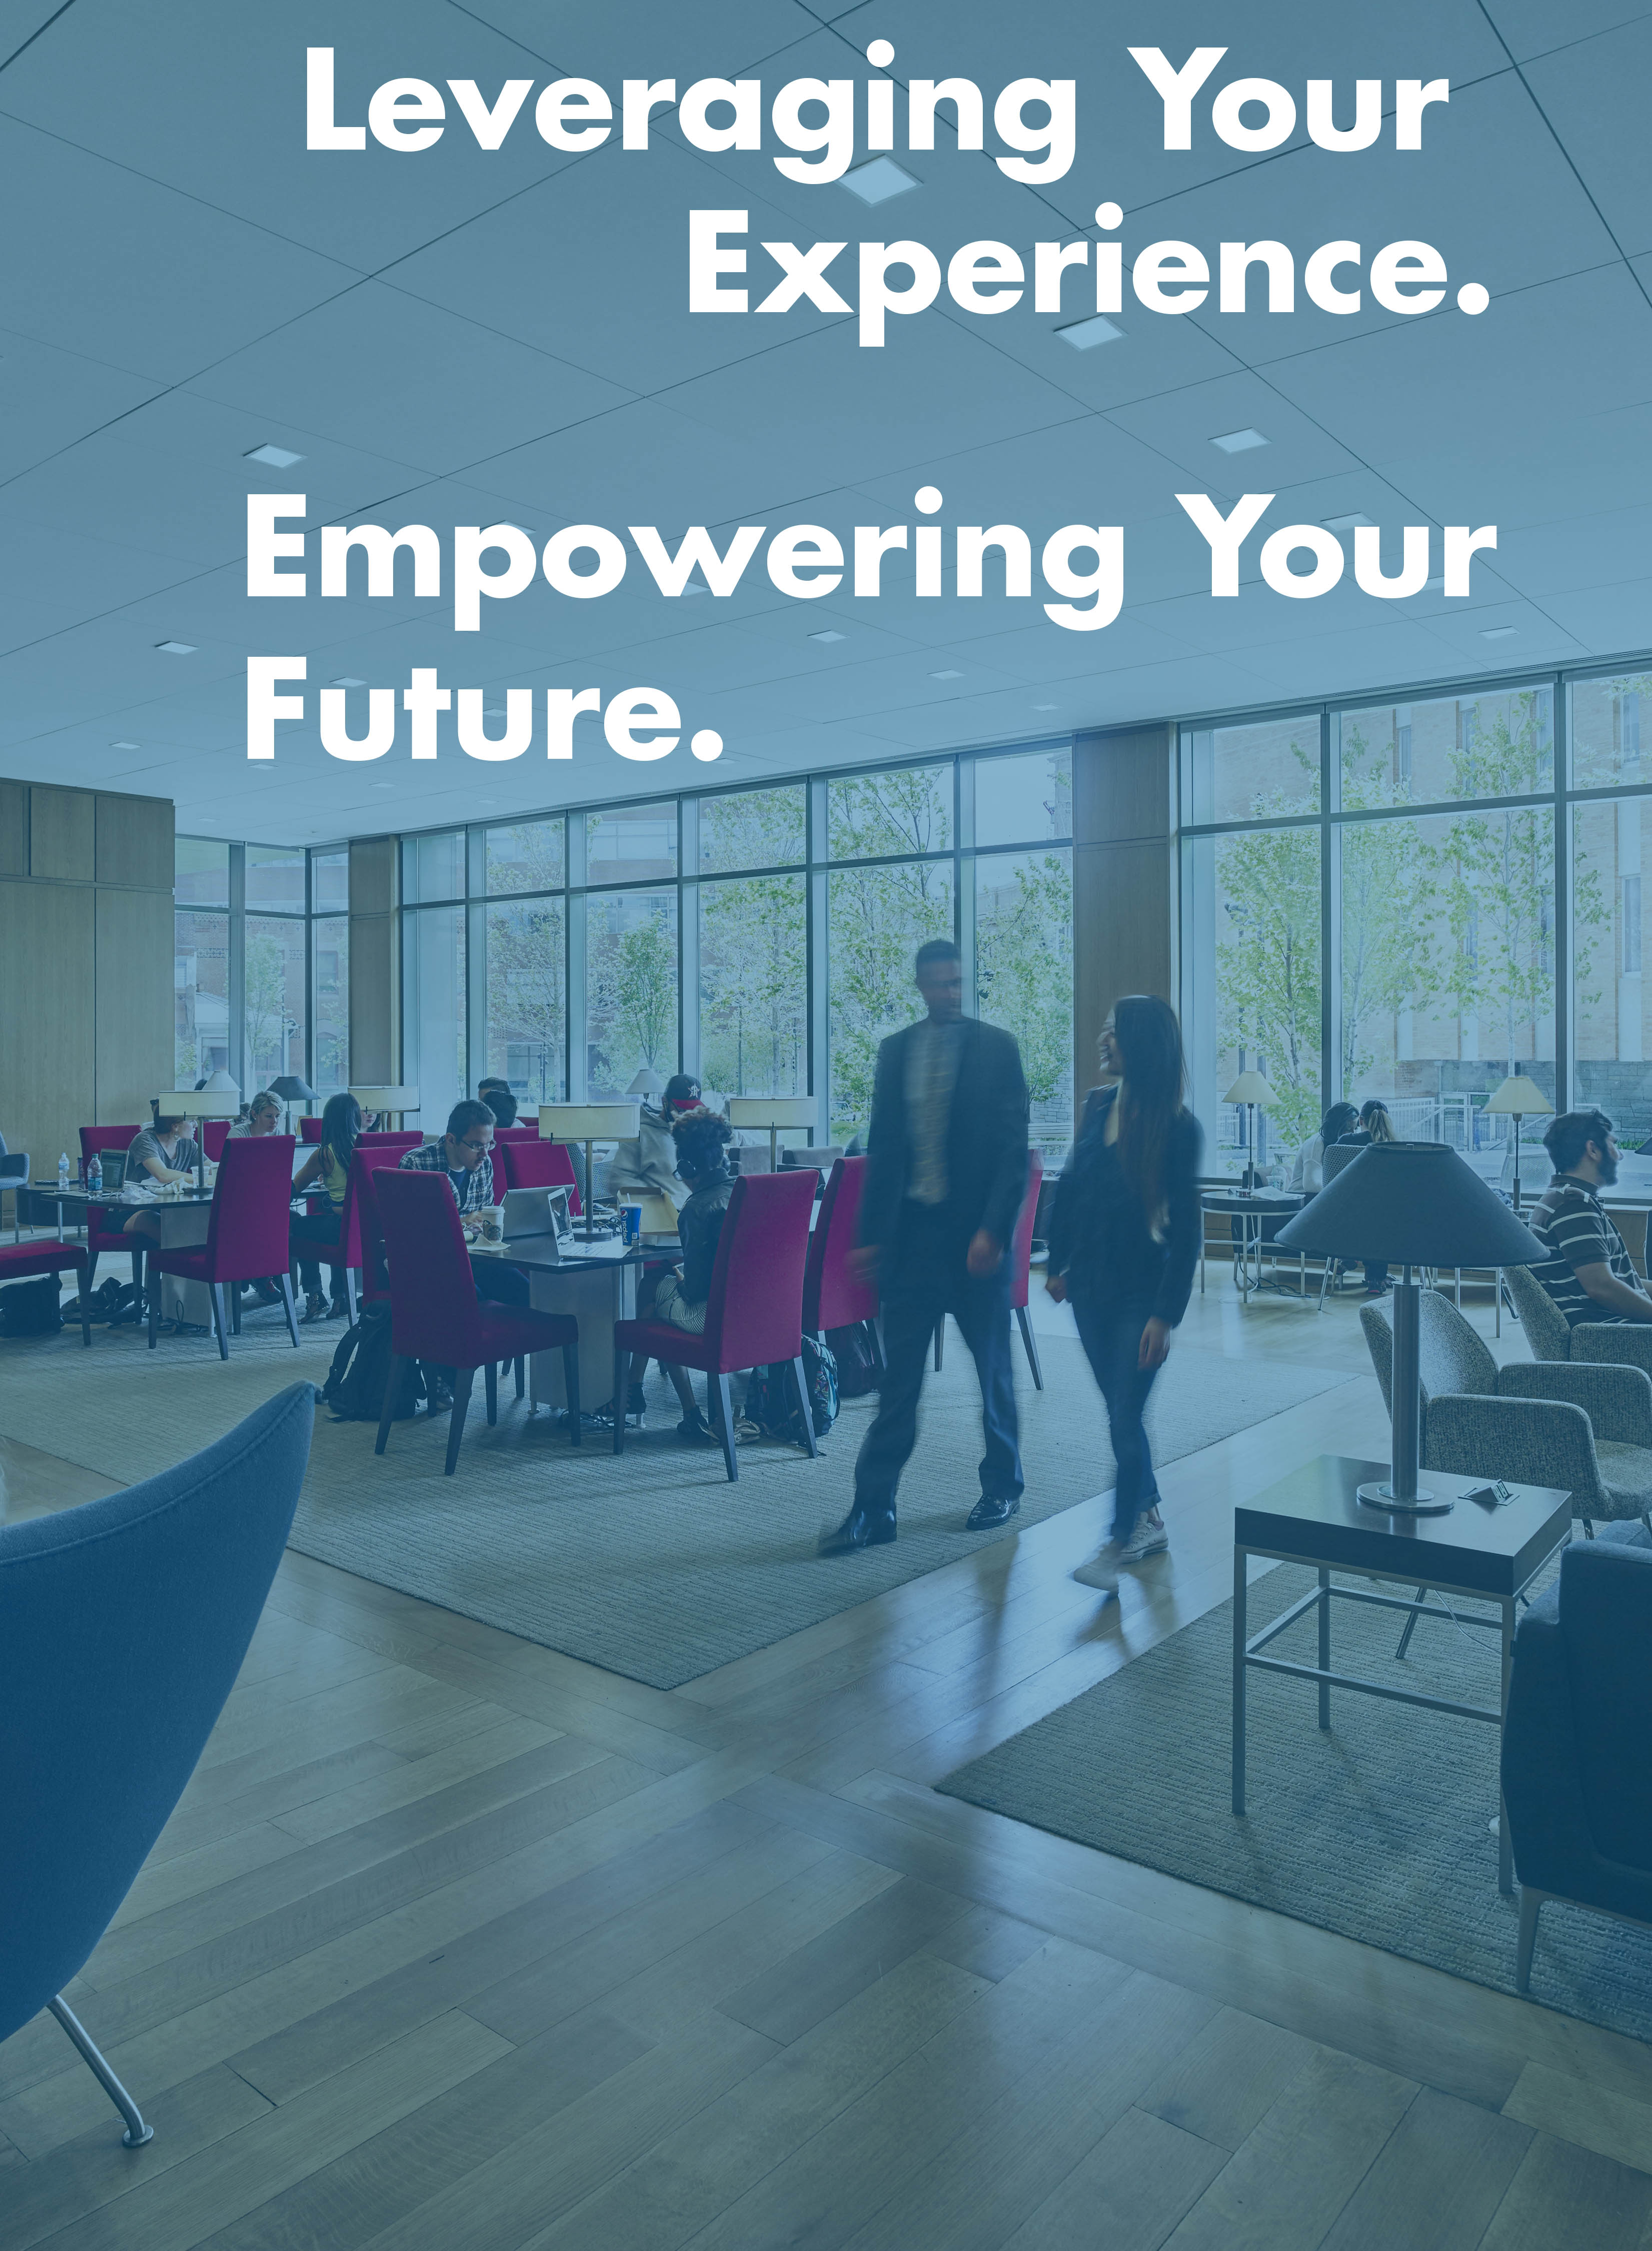 Leveraging Your Experience. Empowering Your Future.